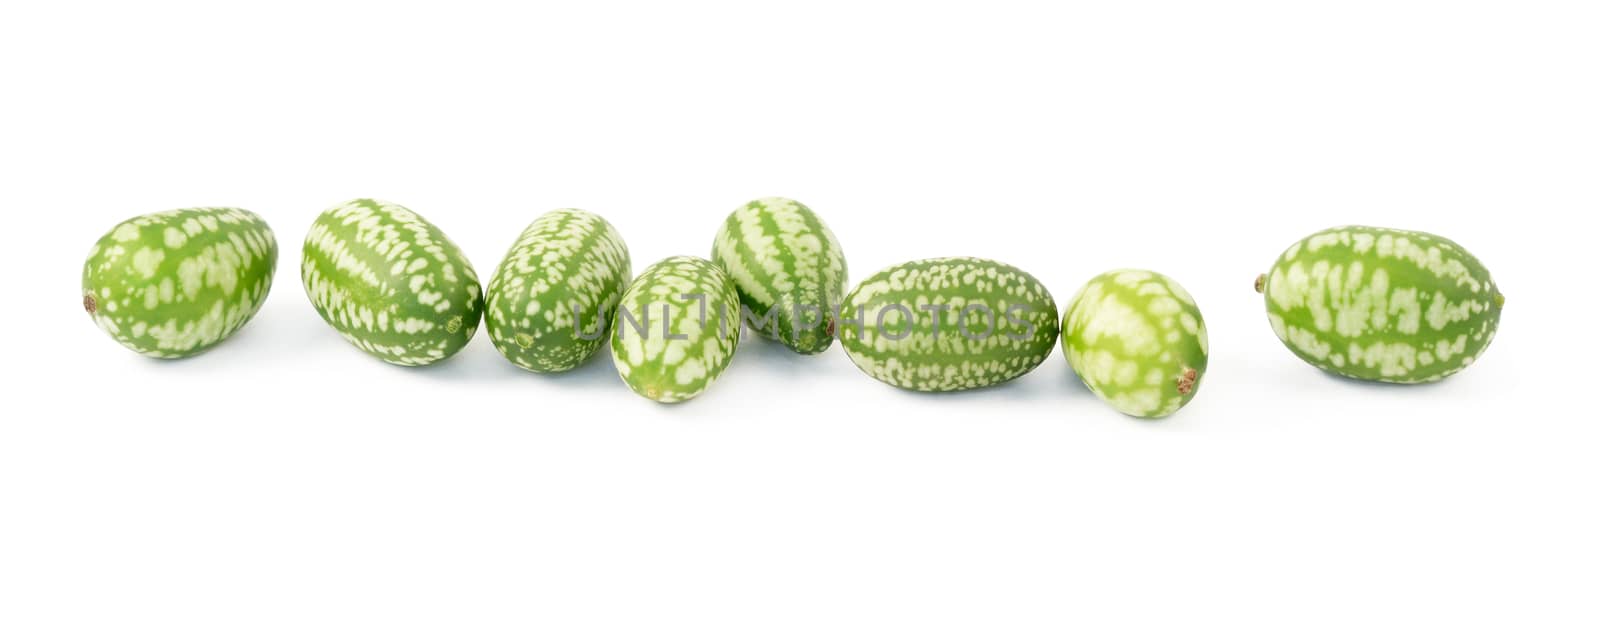 Row of eight cucamelons by sarahdoow